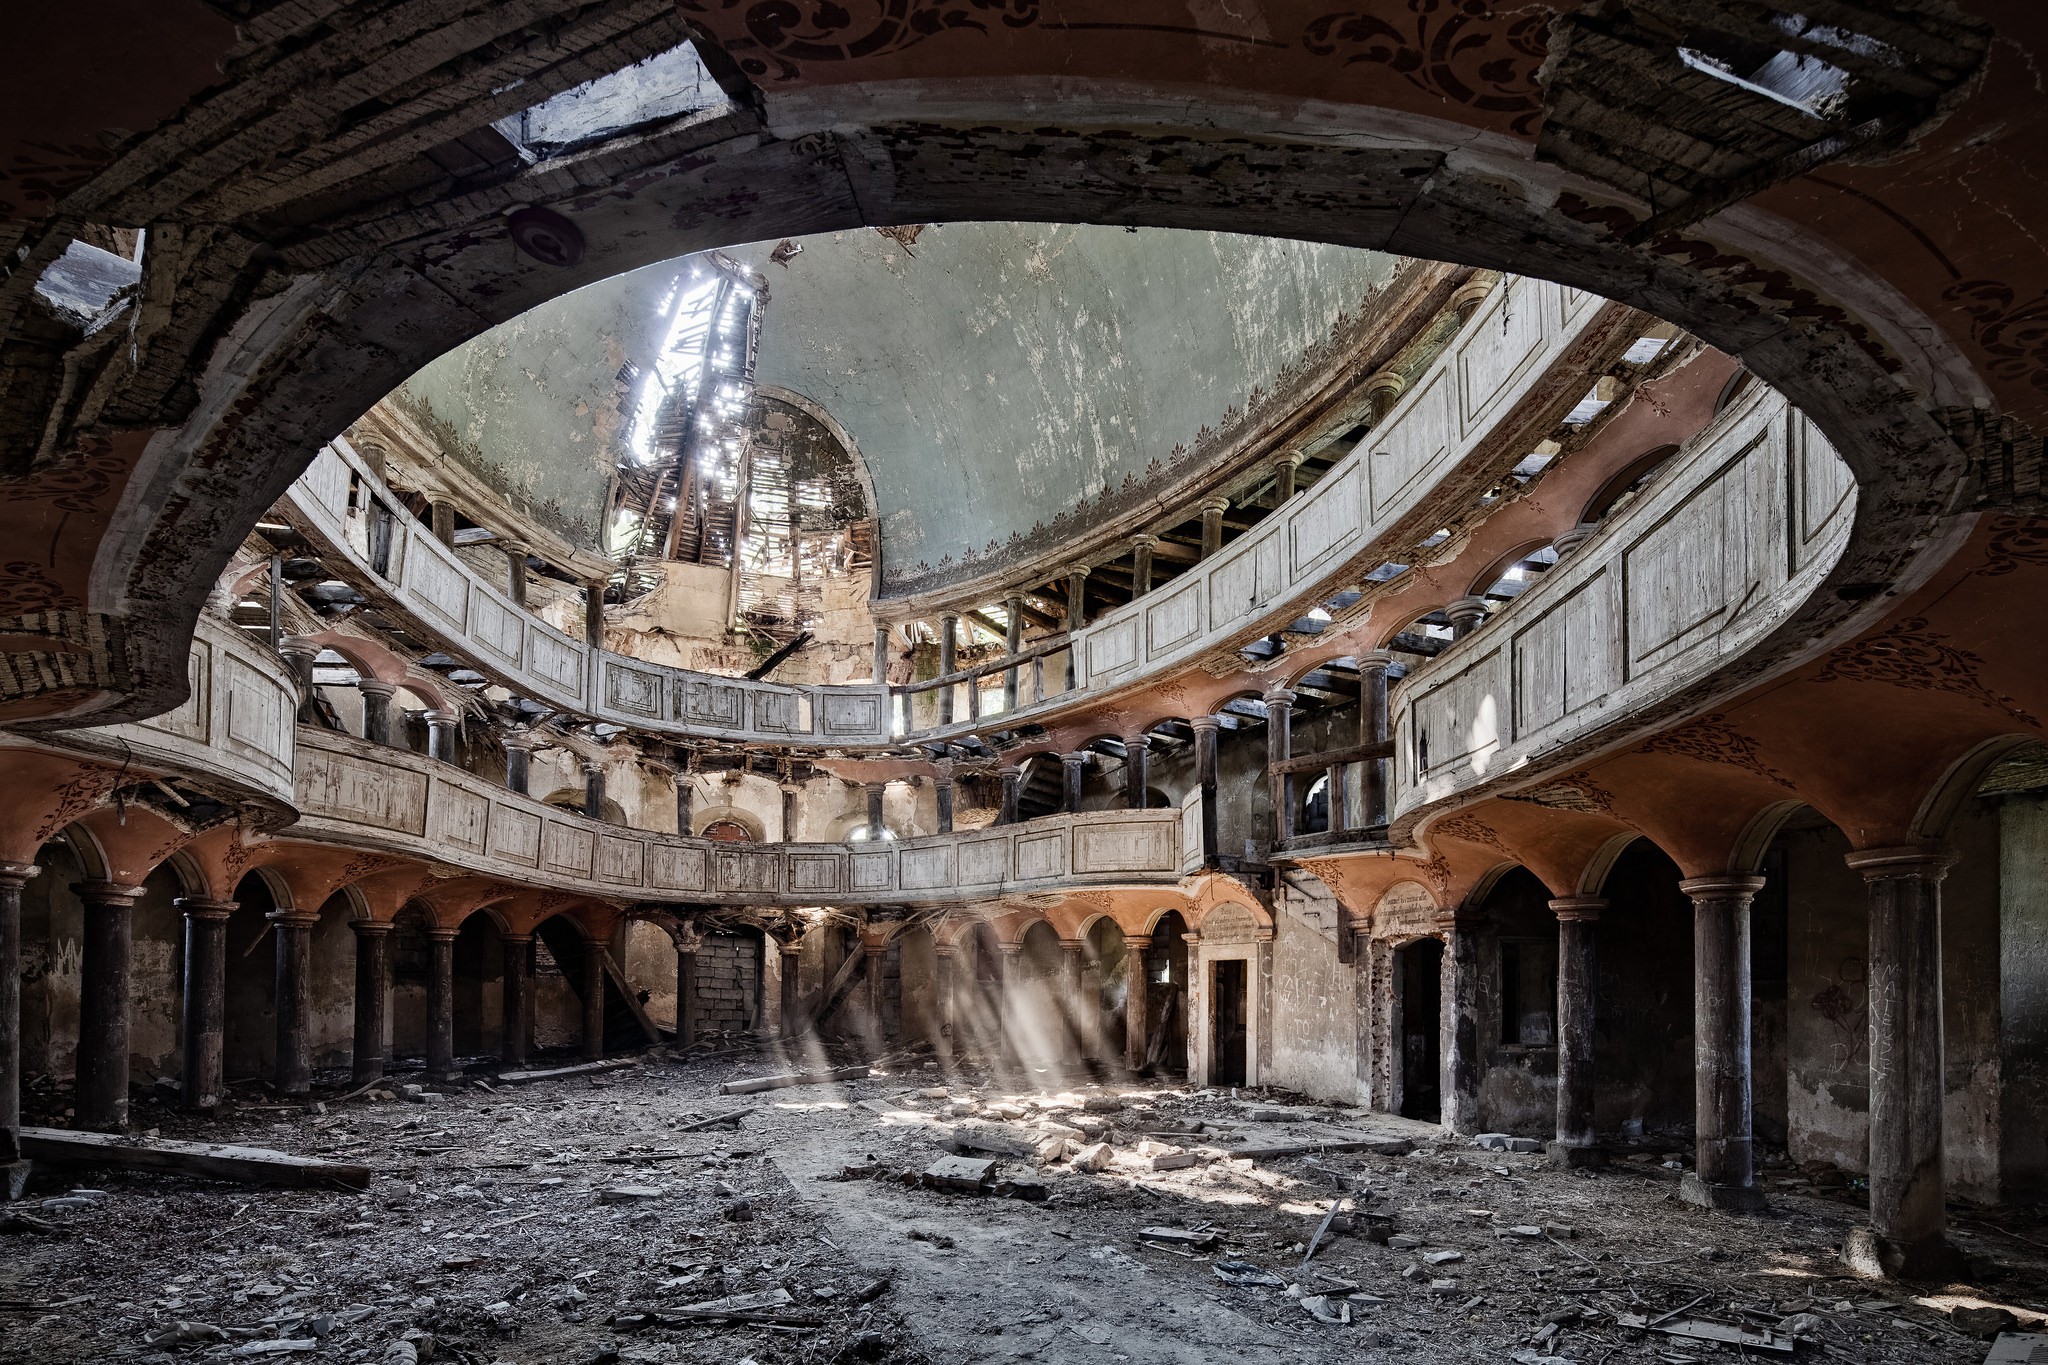 General 2048x1365 architecture building abandoned sun rays column pillar dirt dome balcony arch old building